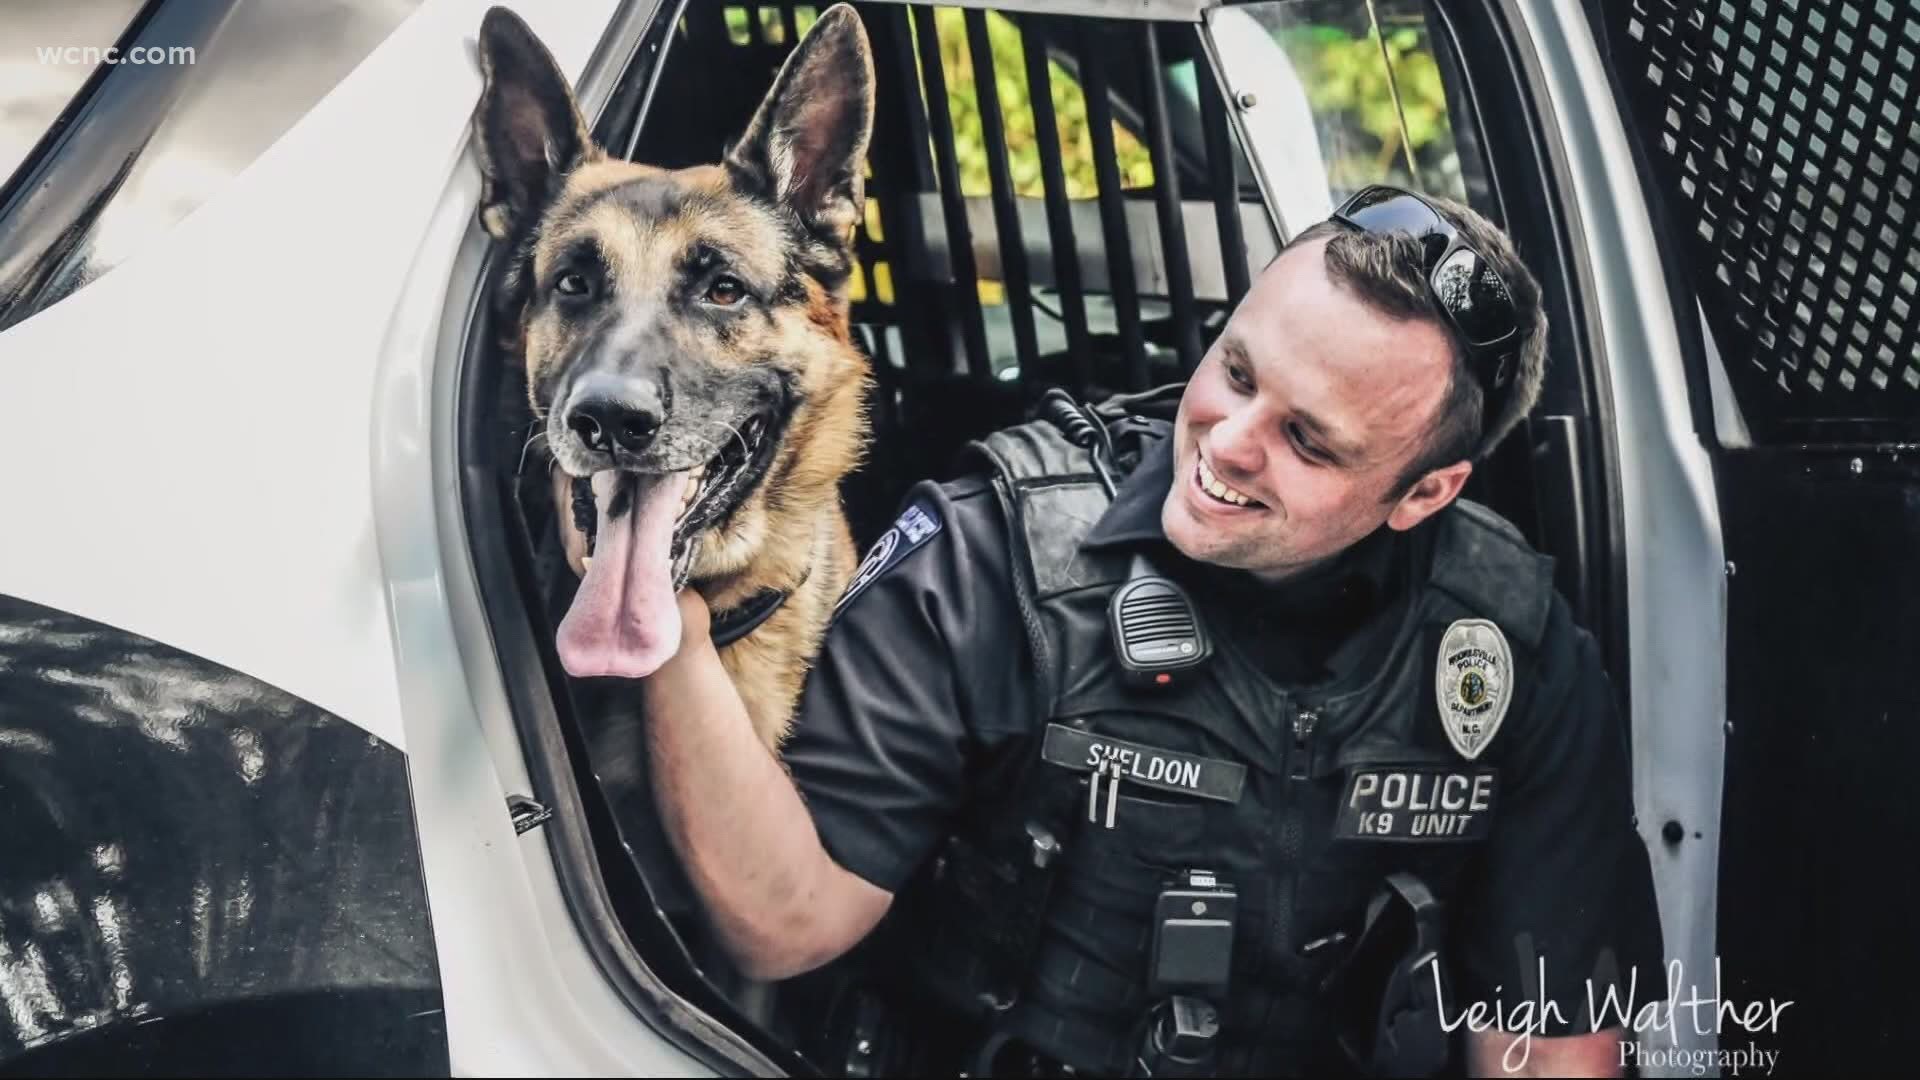 The earnings from Clutch Coffee's two Mooresville locations will go directly to Sheldon's K9s, which was created in memory of Officer Jordan Sheldon.